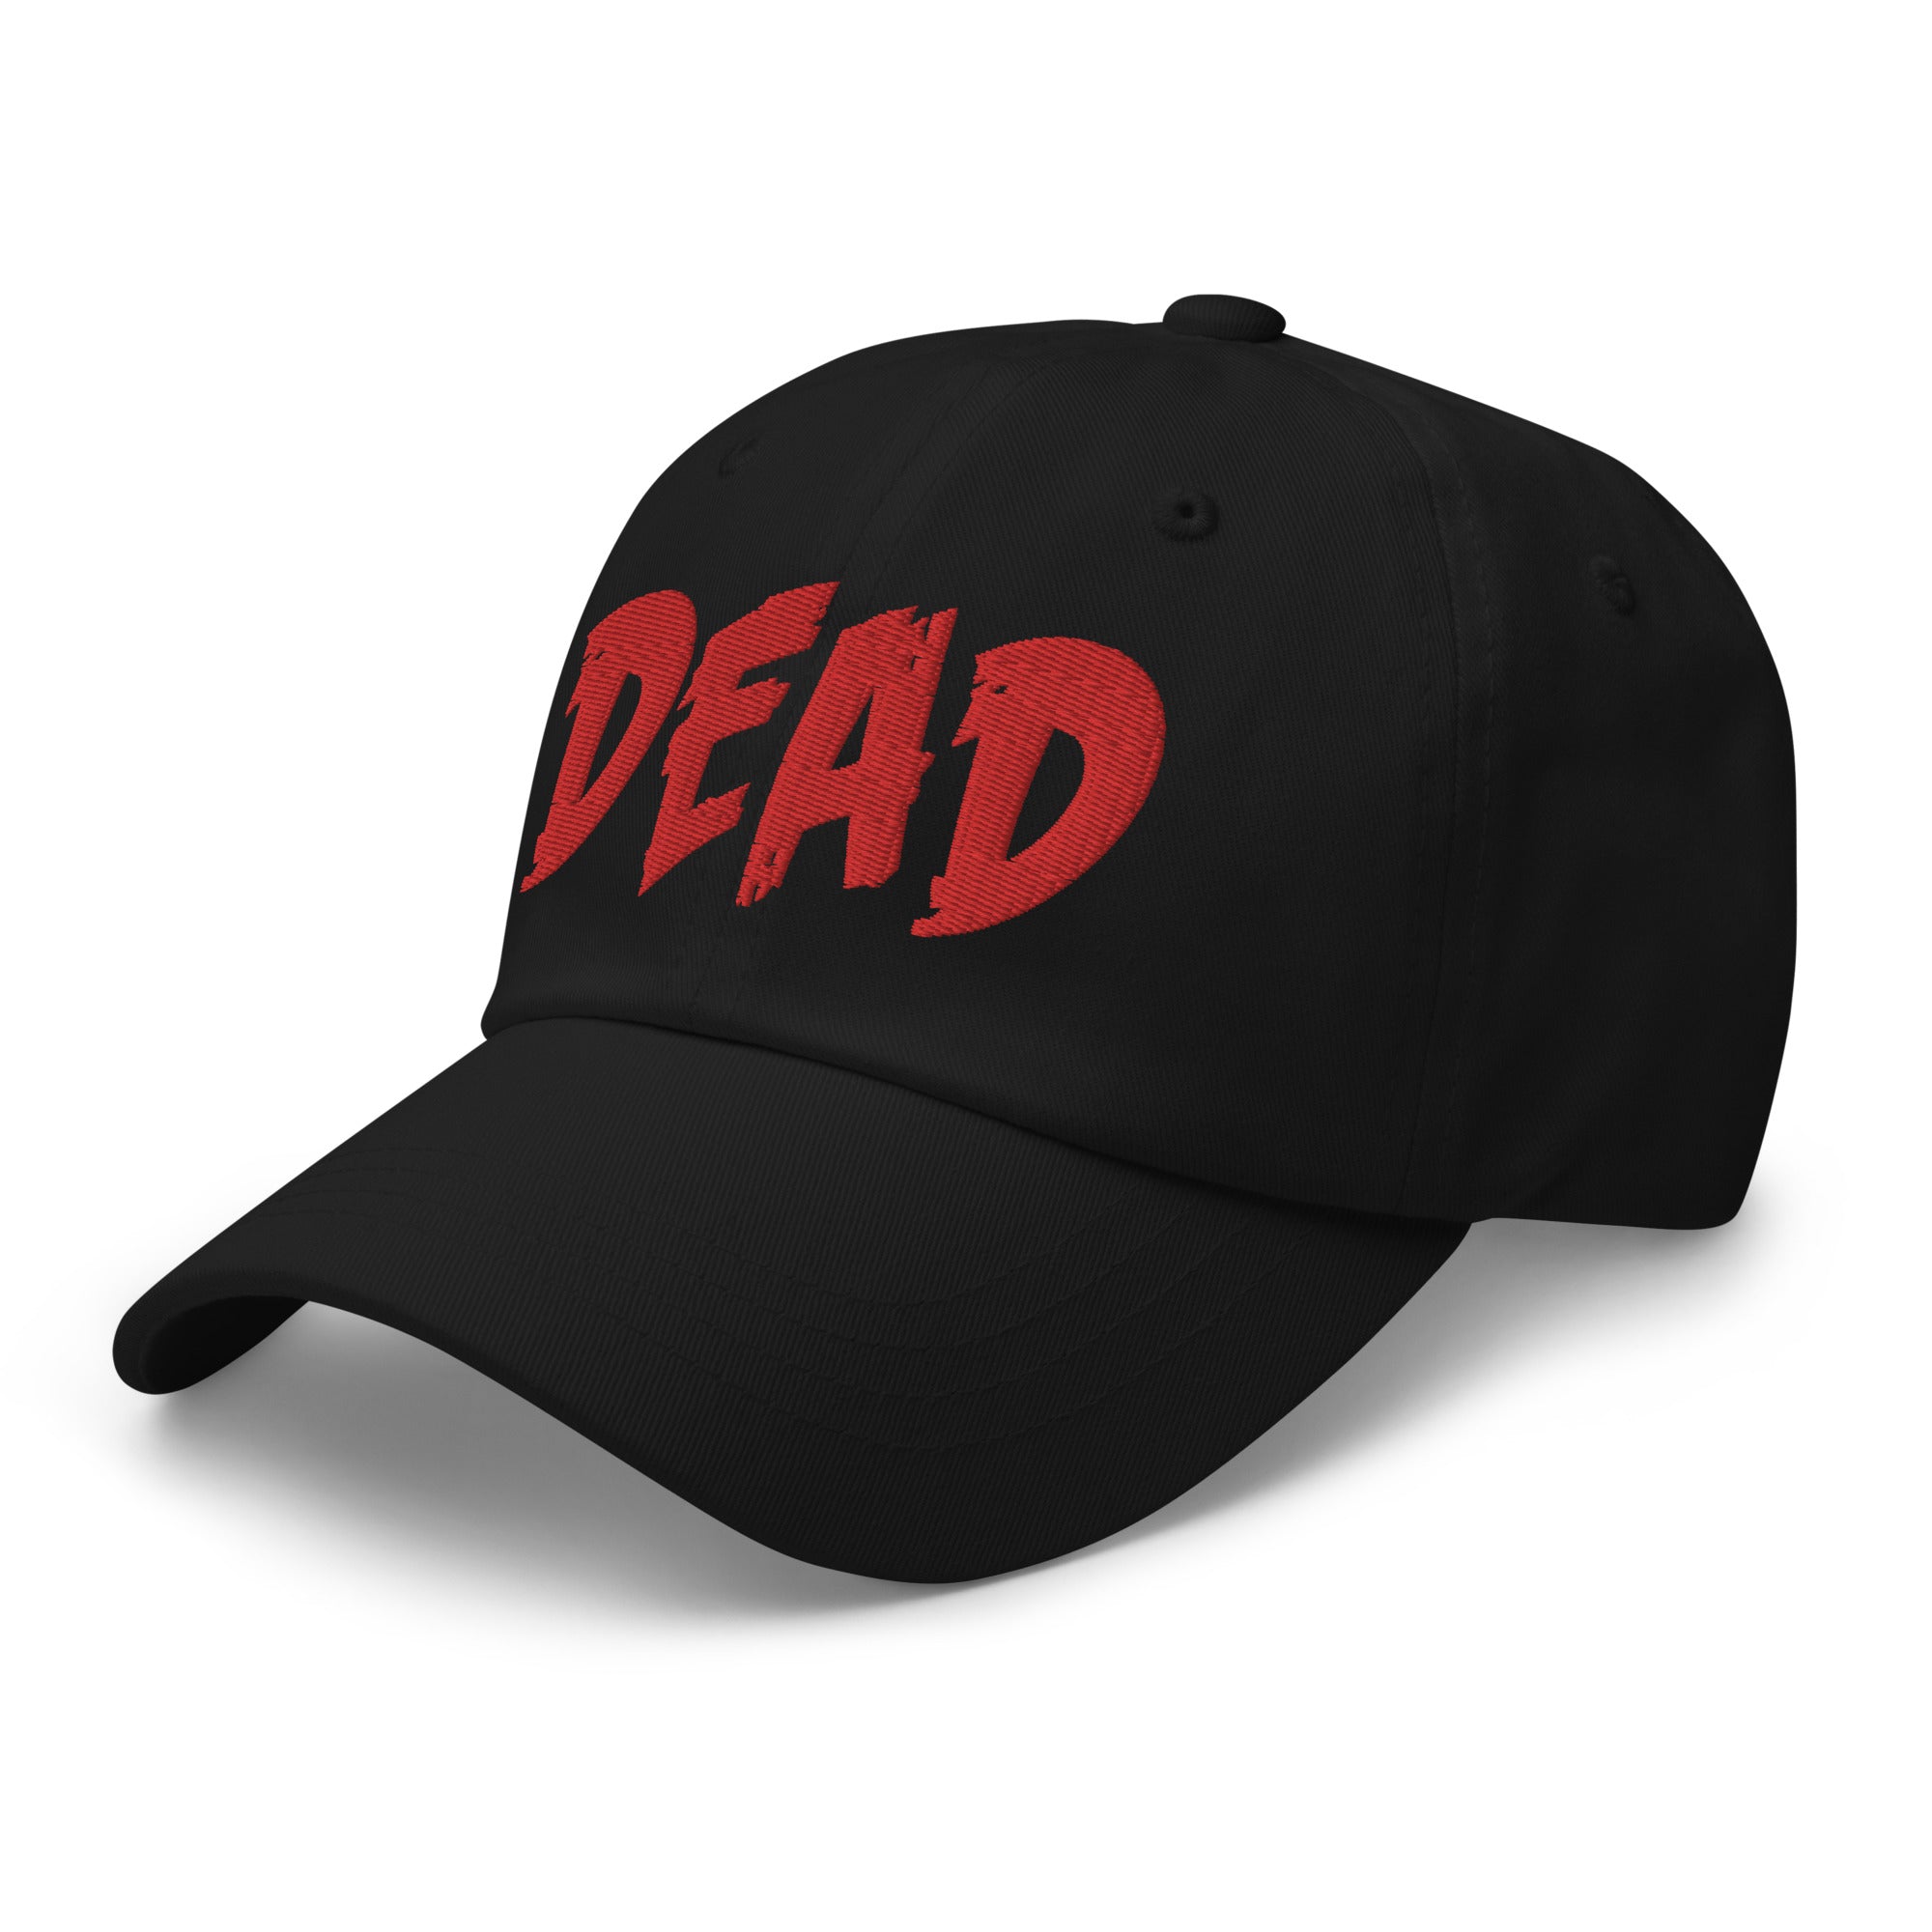 DEAD Emotional Depression Embroidered Baseball Cap Red Thread Dad hat - Edge of Life Designs